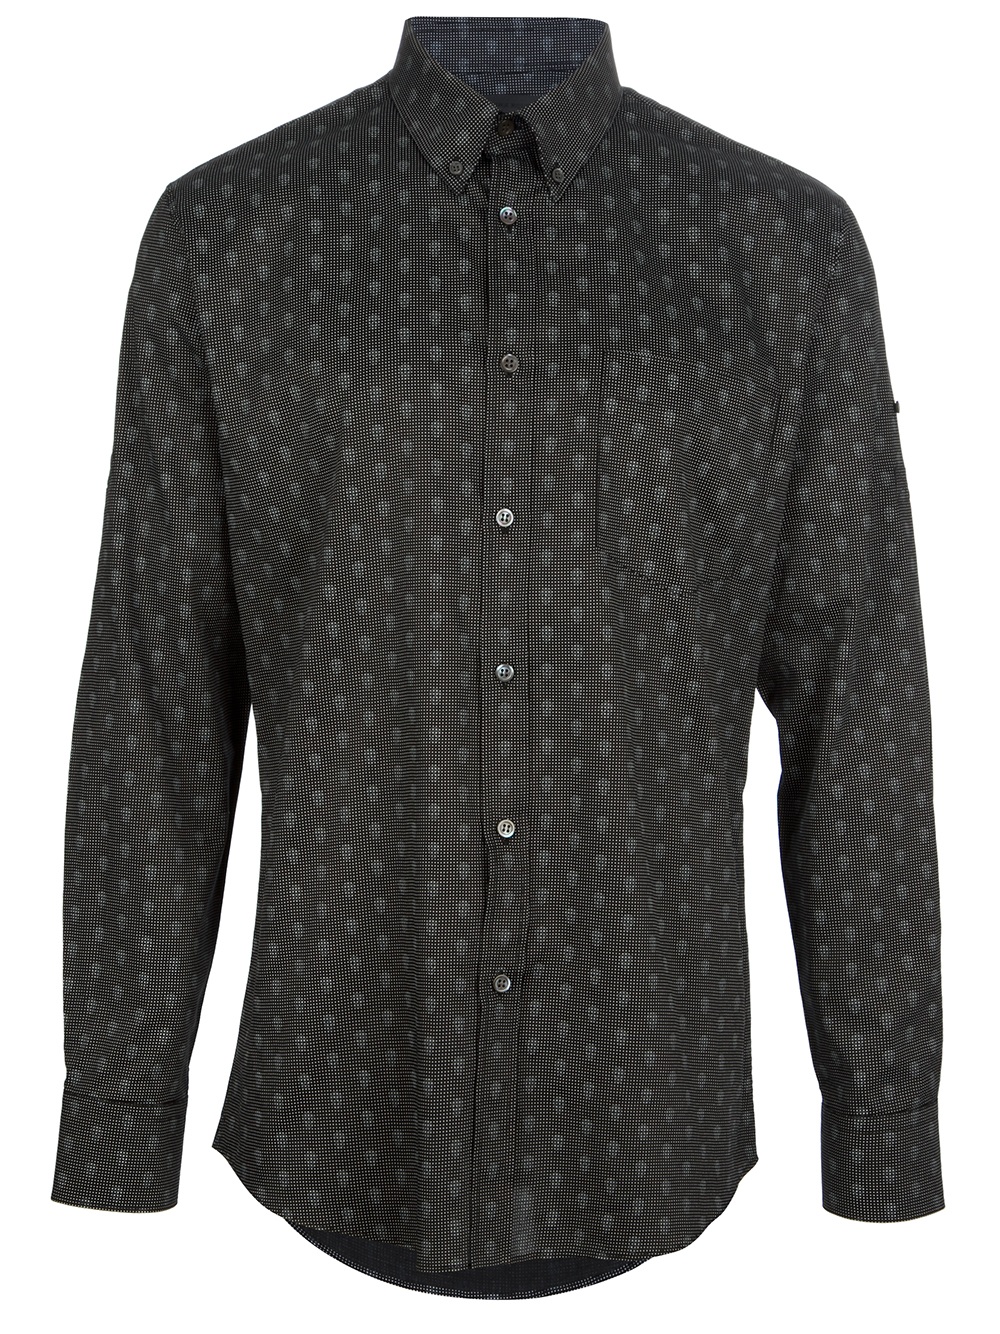 Alexander McQueen Spotted Button Down Shirt in Black for Men - Lyst